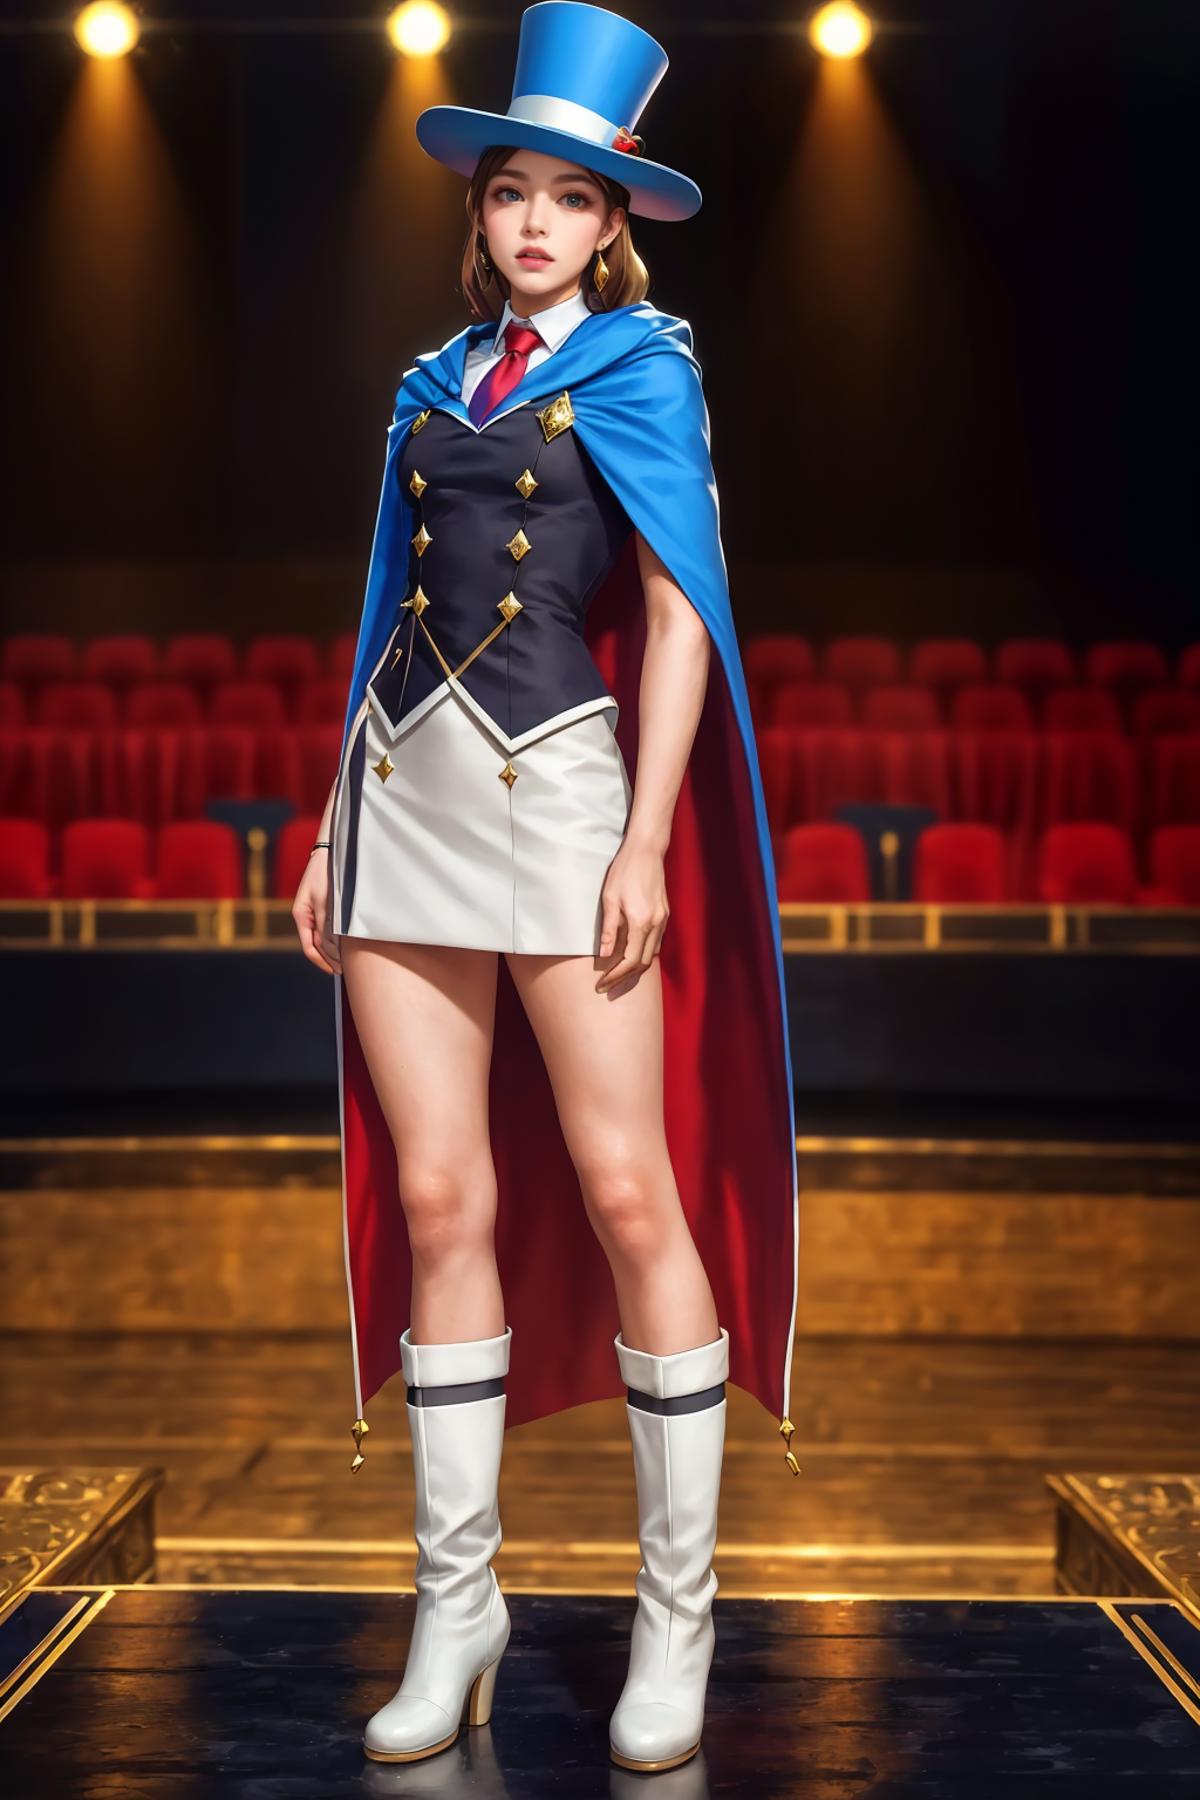 Ace attorney——Trucy Wright image by affa1988